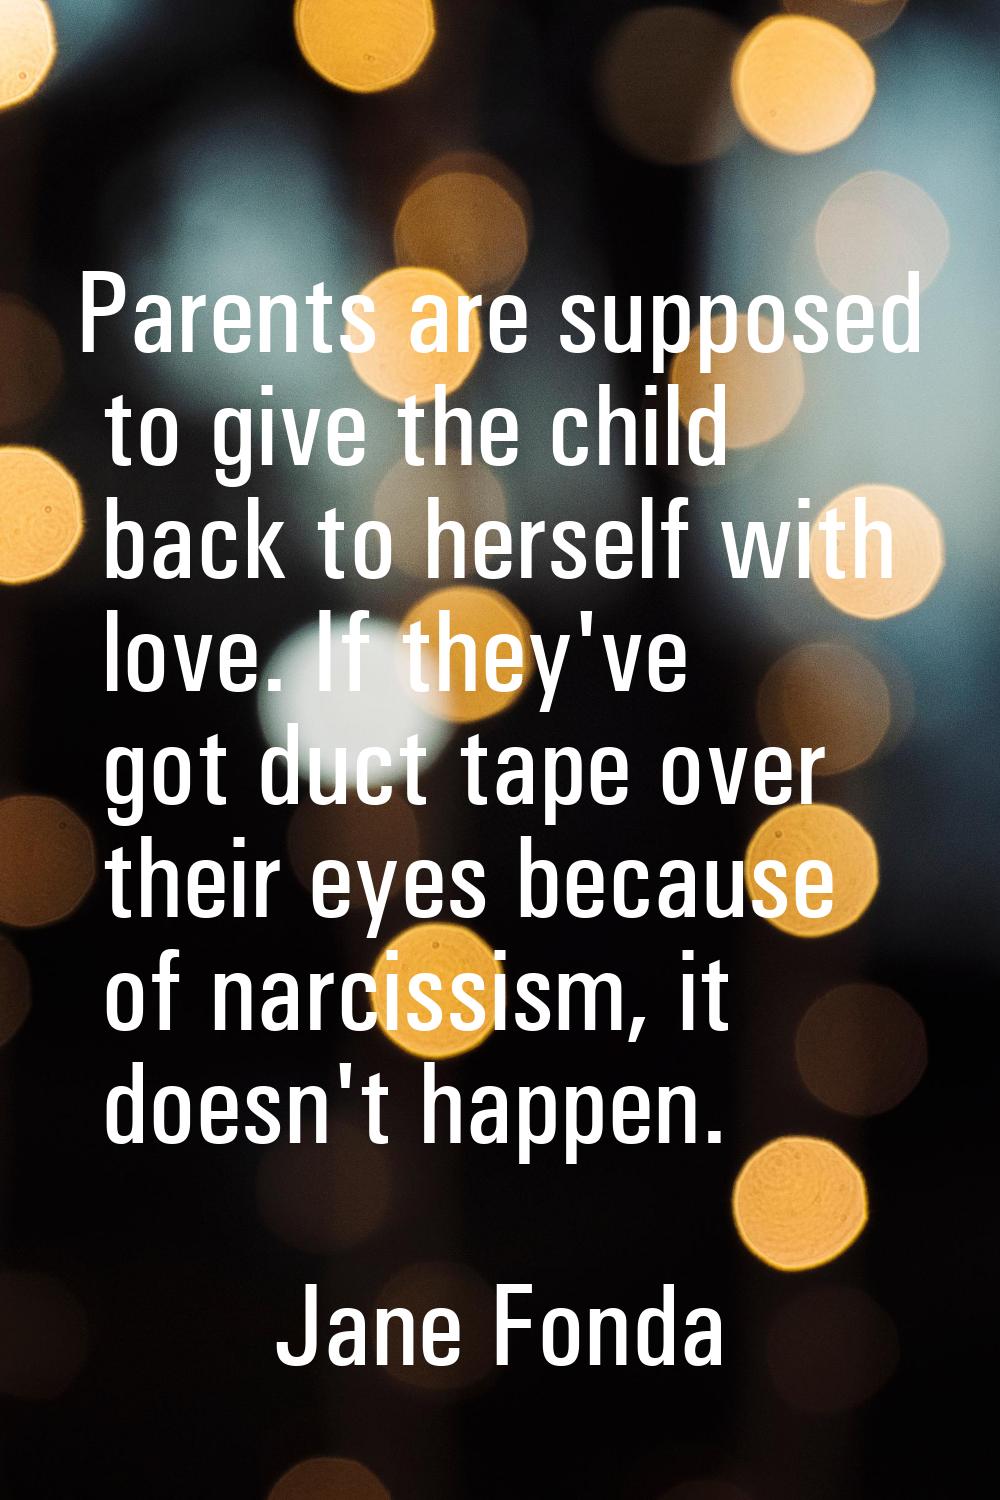 Parents are supposed to give the child back to herself with love. If they've got duct tape over the